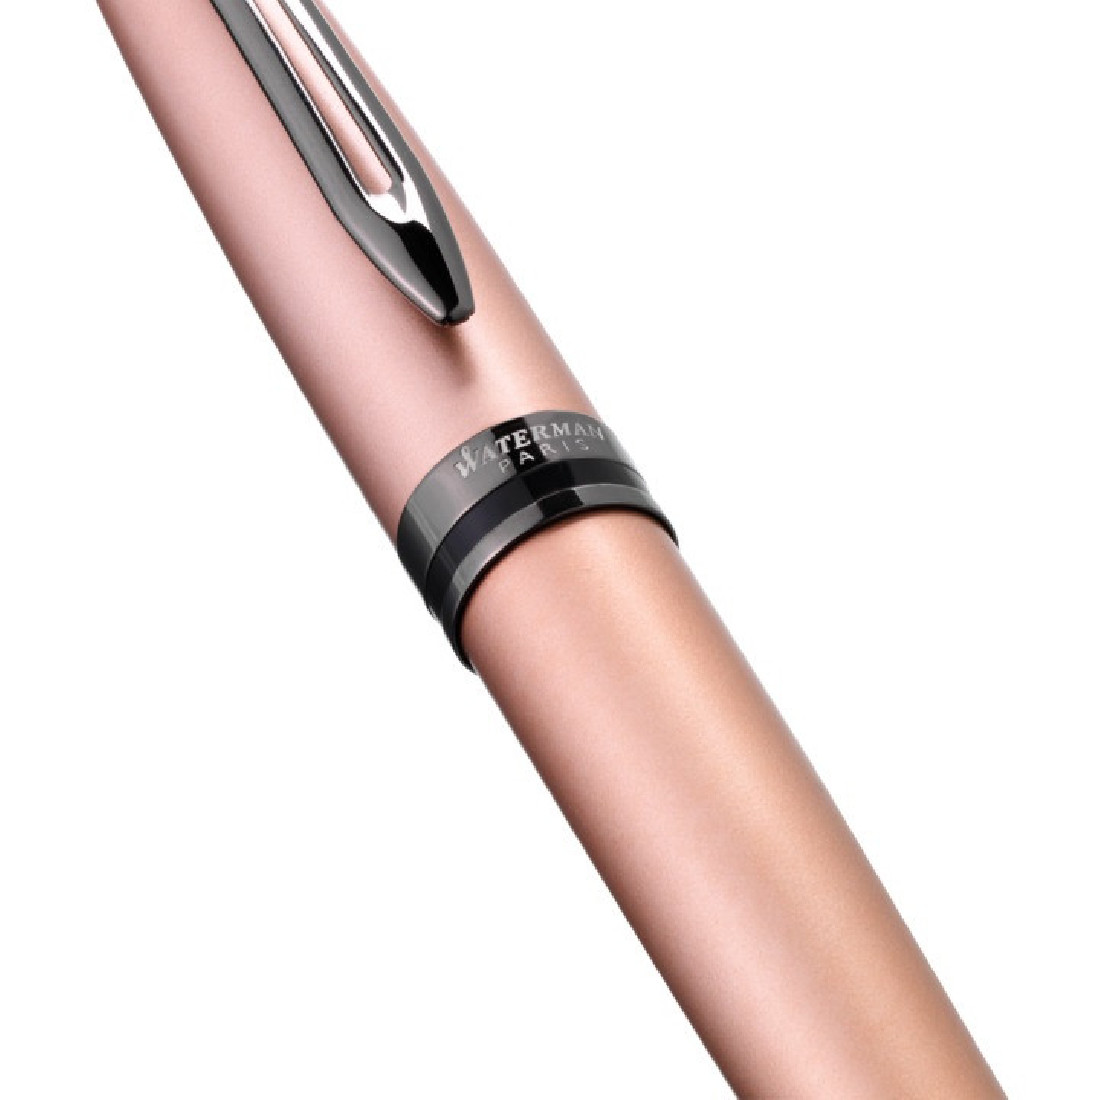 Waterman Expert Metallic Rose Gold Lacquer Rollerball (Special Edition)